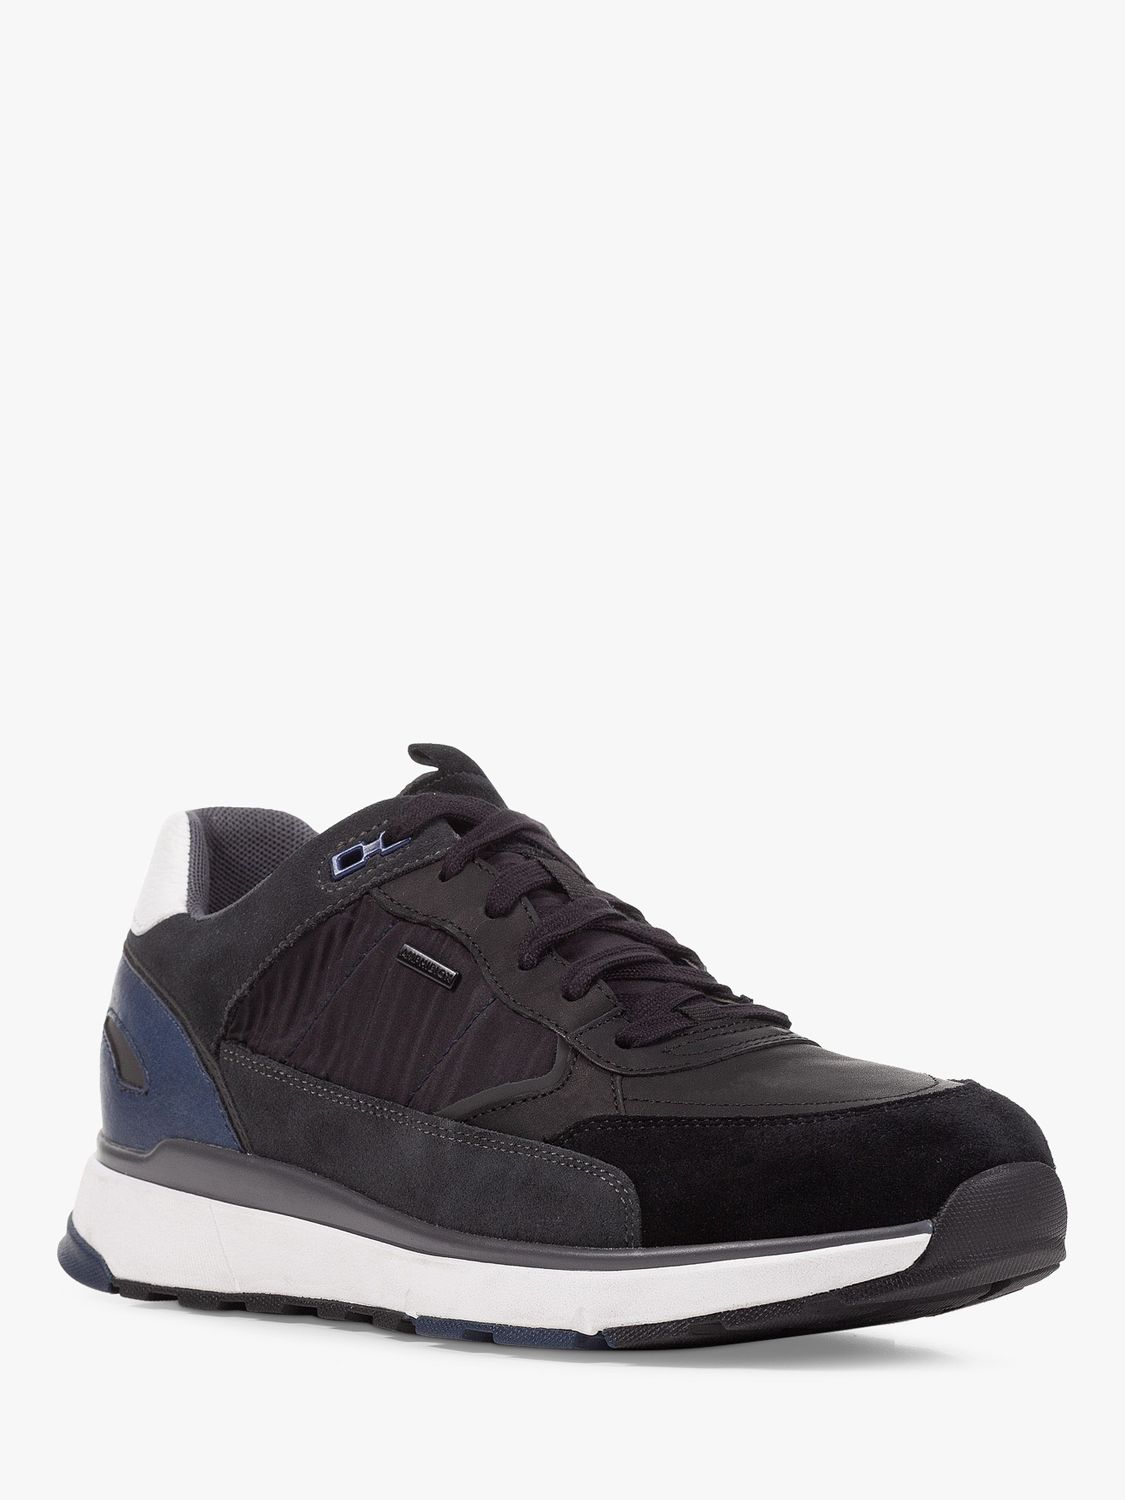 Geox Wide Fit Dolomia ABX Trainers, Black at John Lewis & Partners